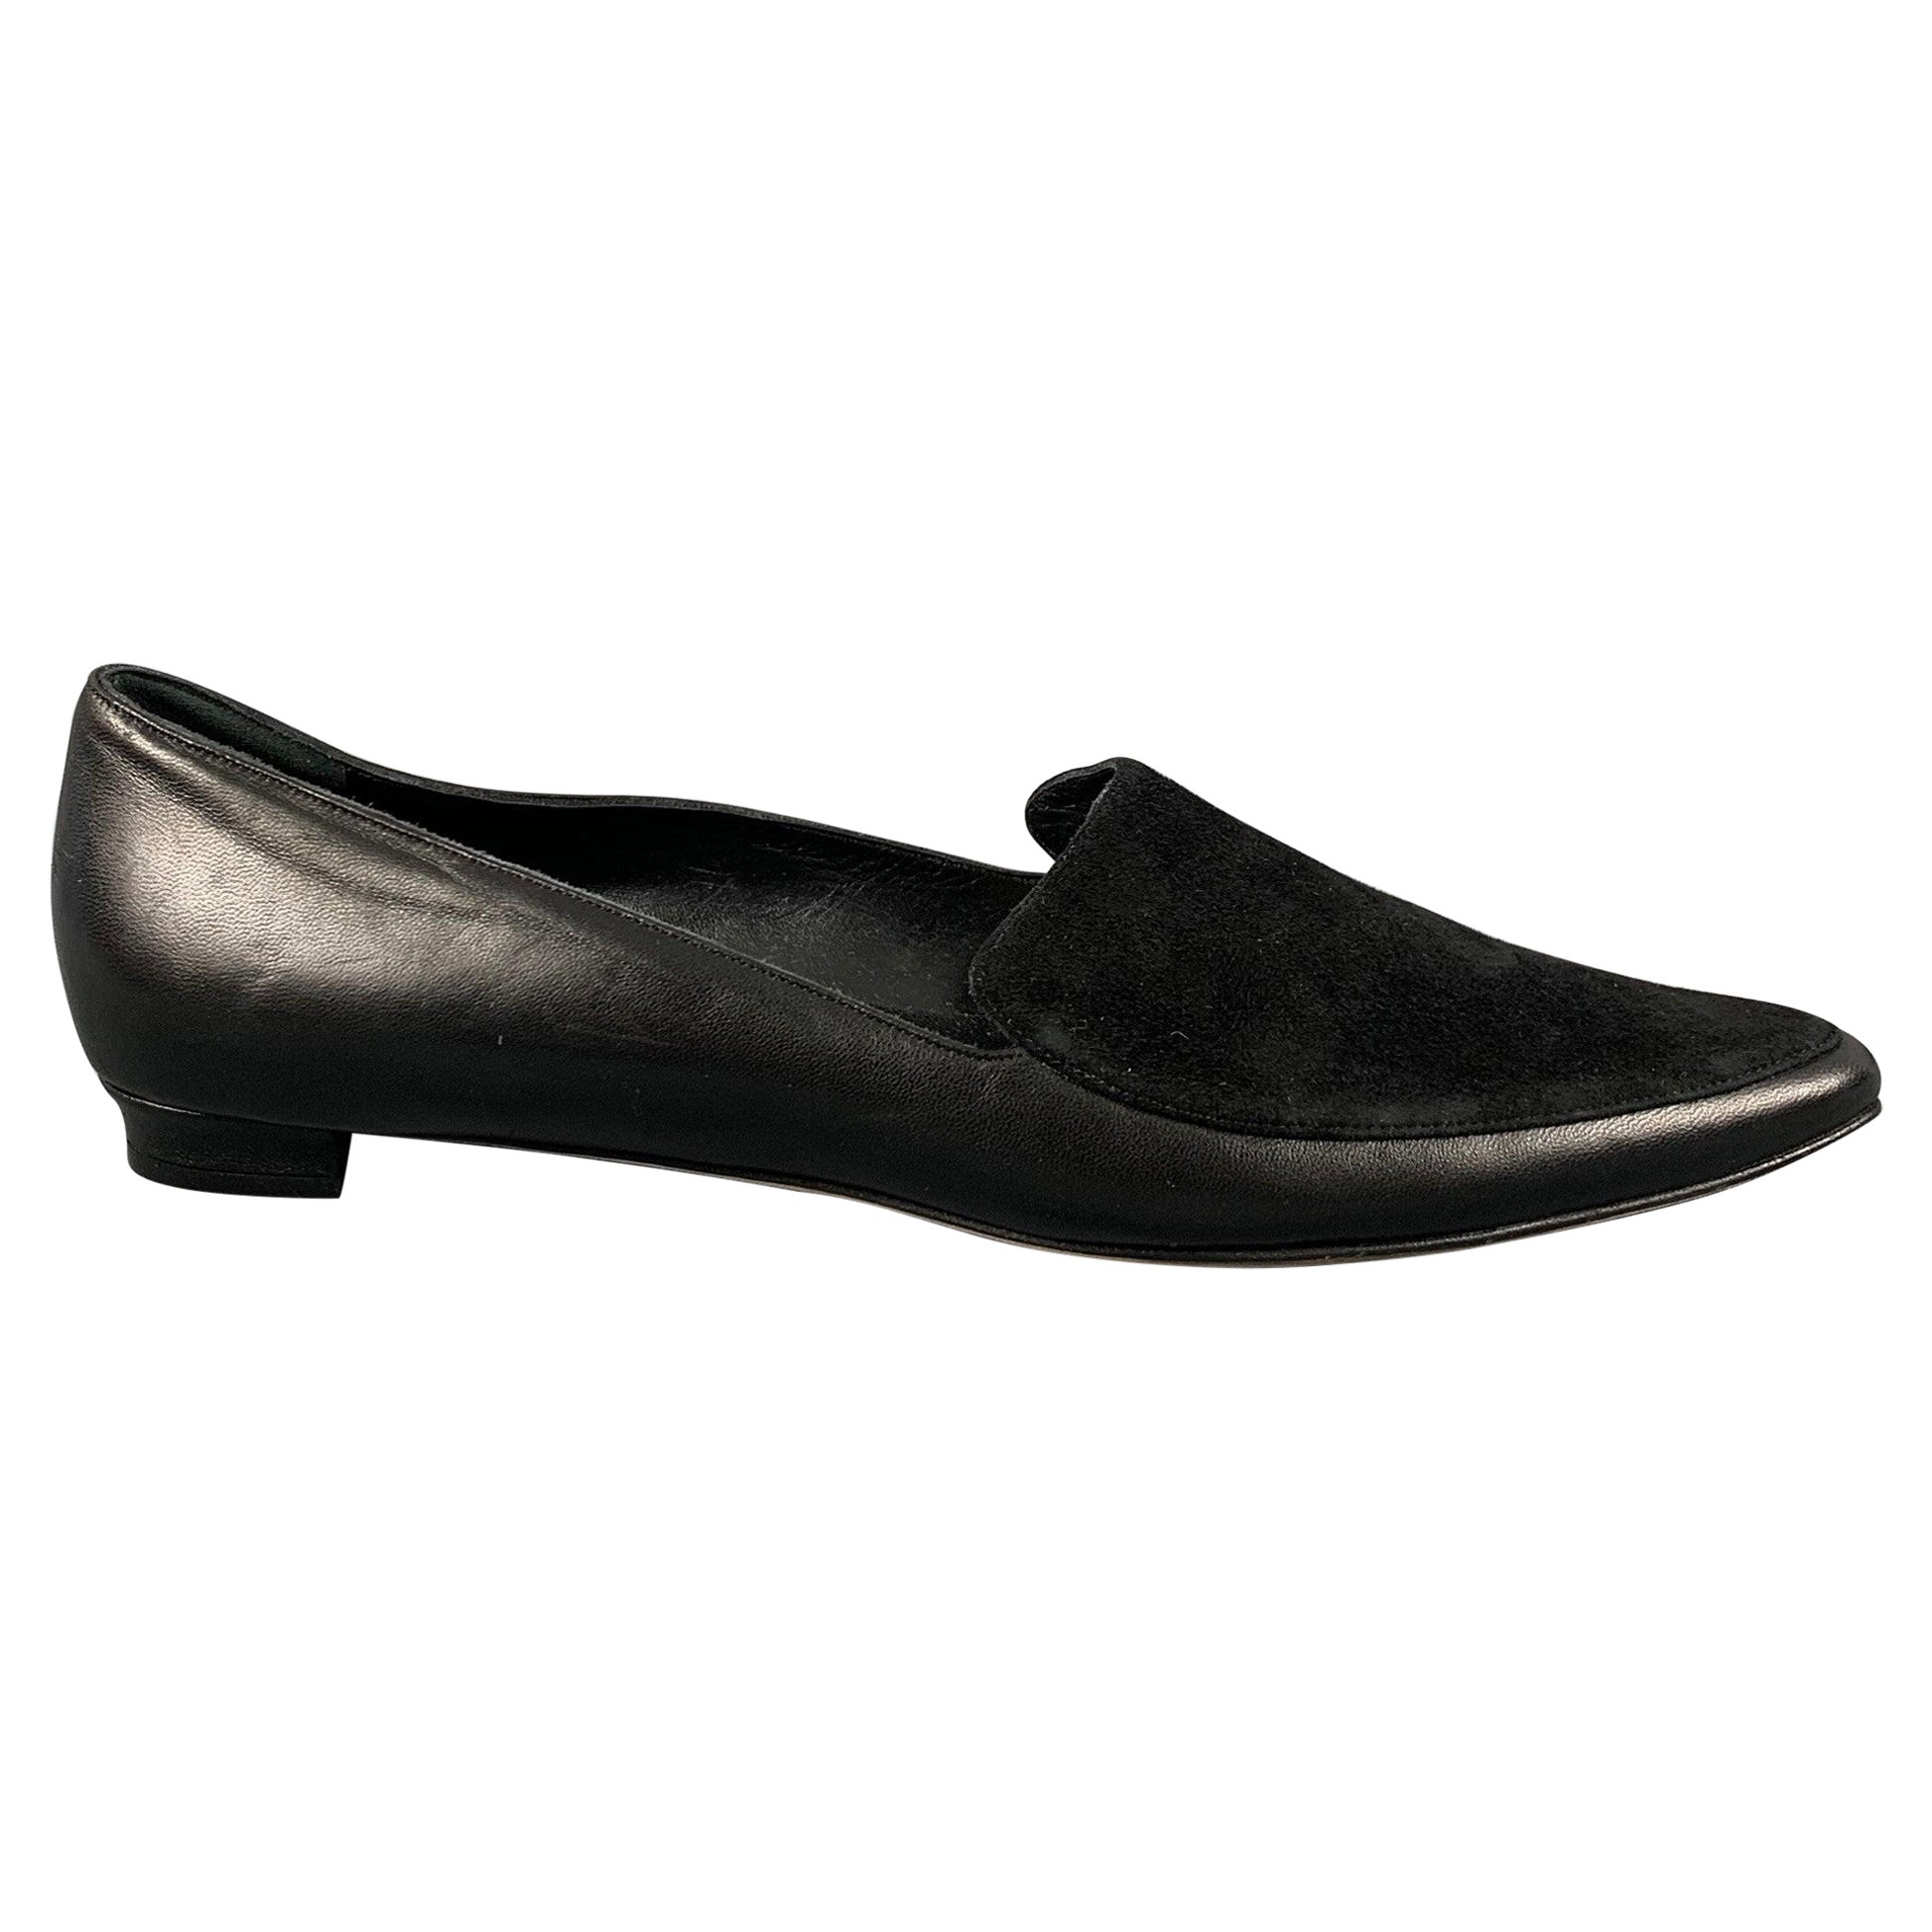 MANOLO BLAHNIK Size 10.5 Black Suede Pointed Toe Flats For Sale